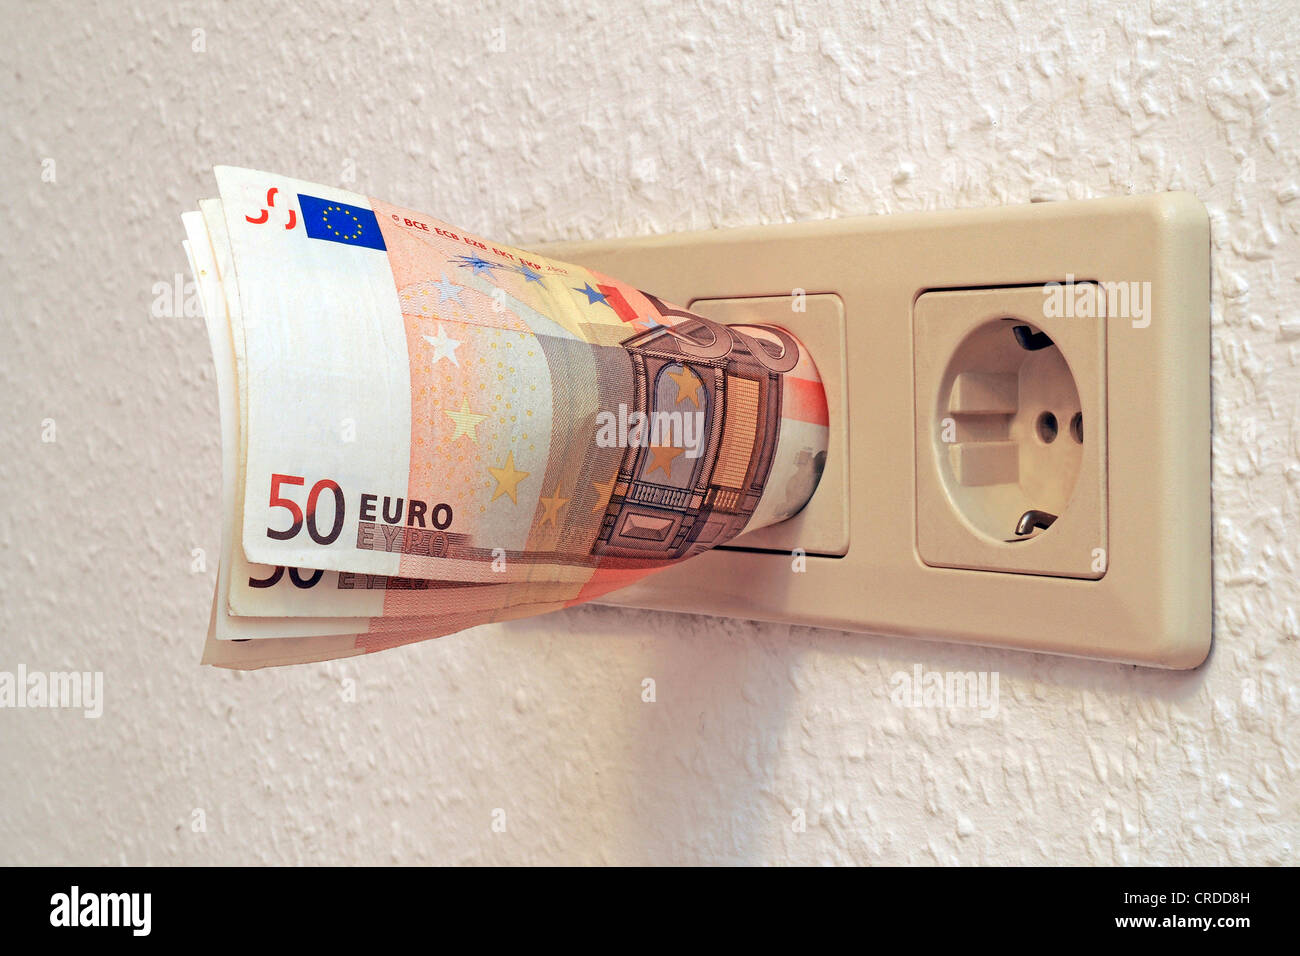 banknotes in power socket, symbol for energy costs, Germany Stock Photo